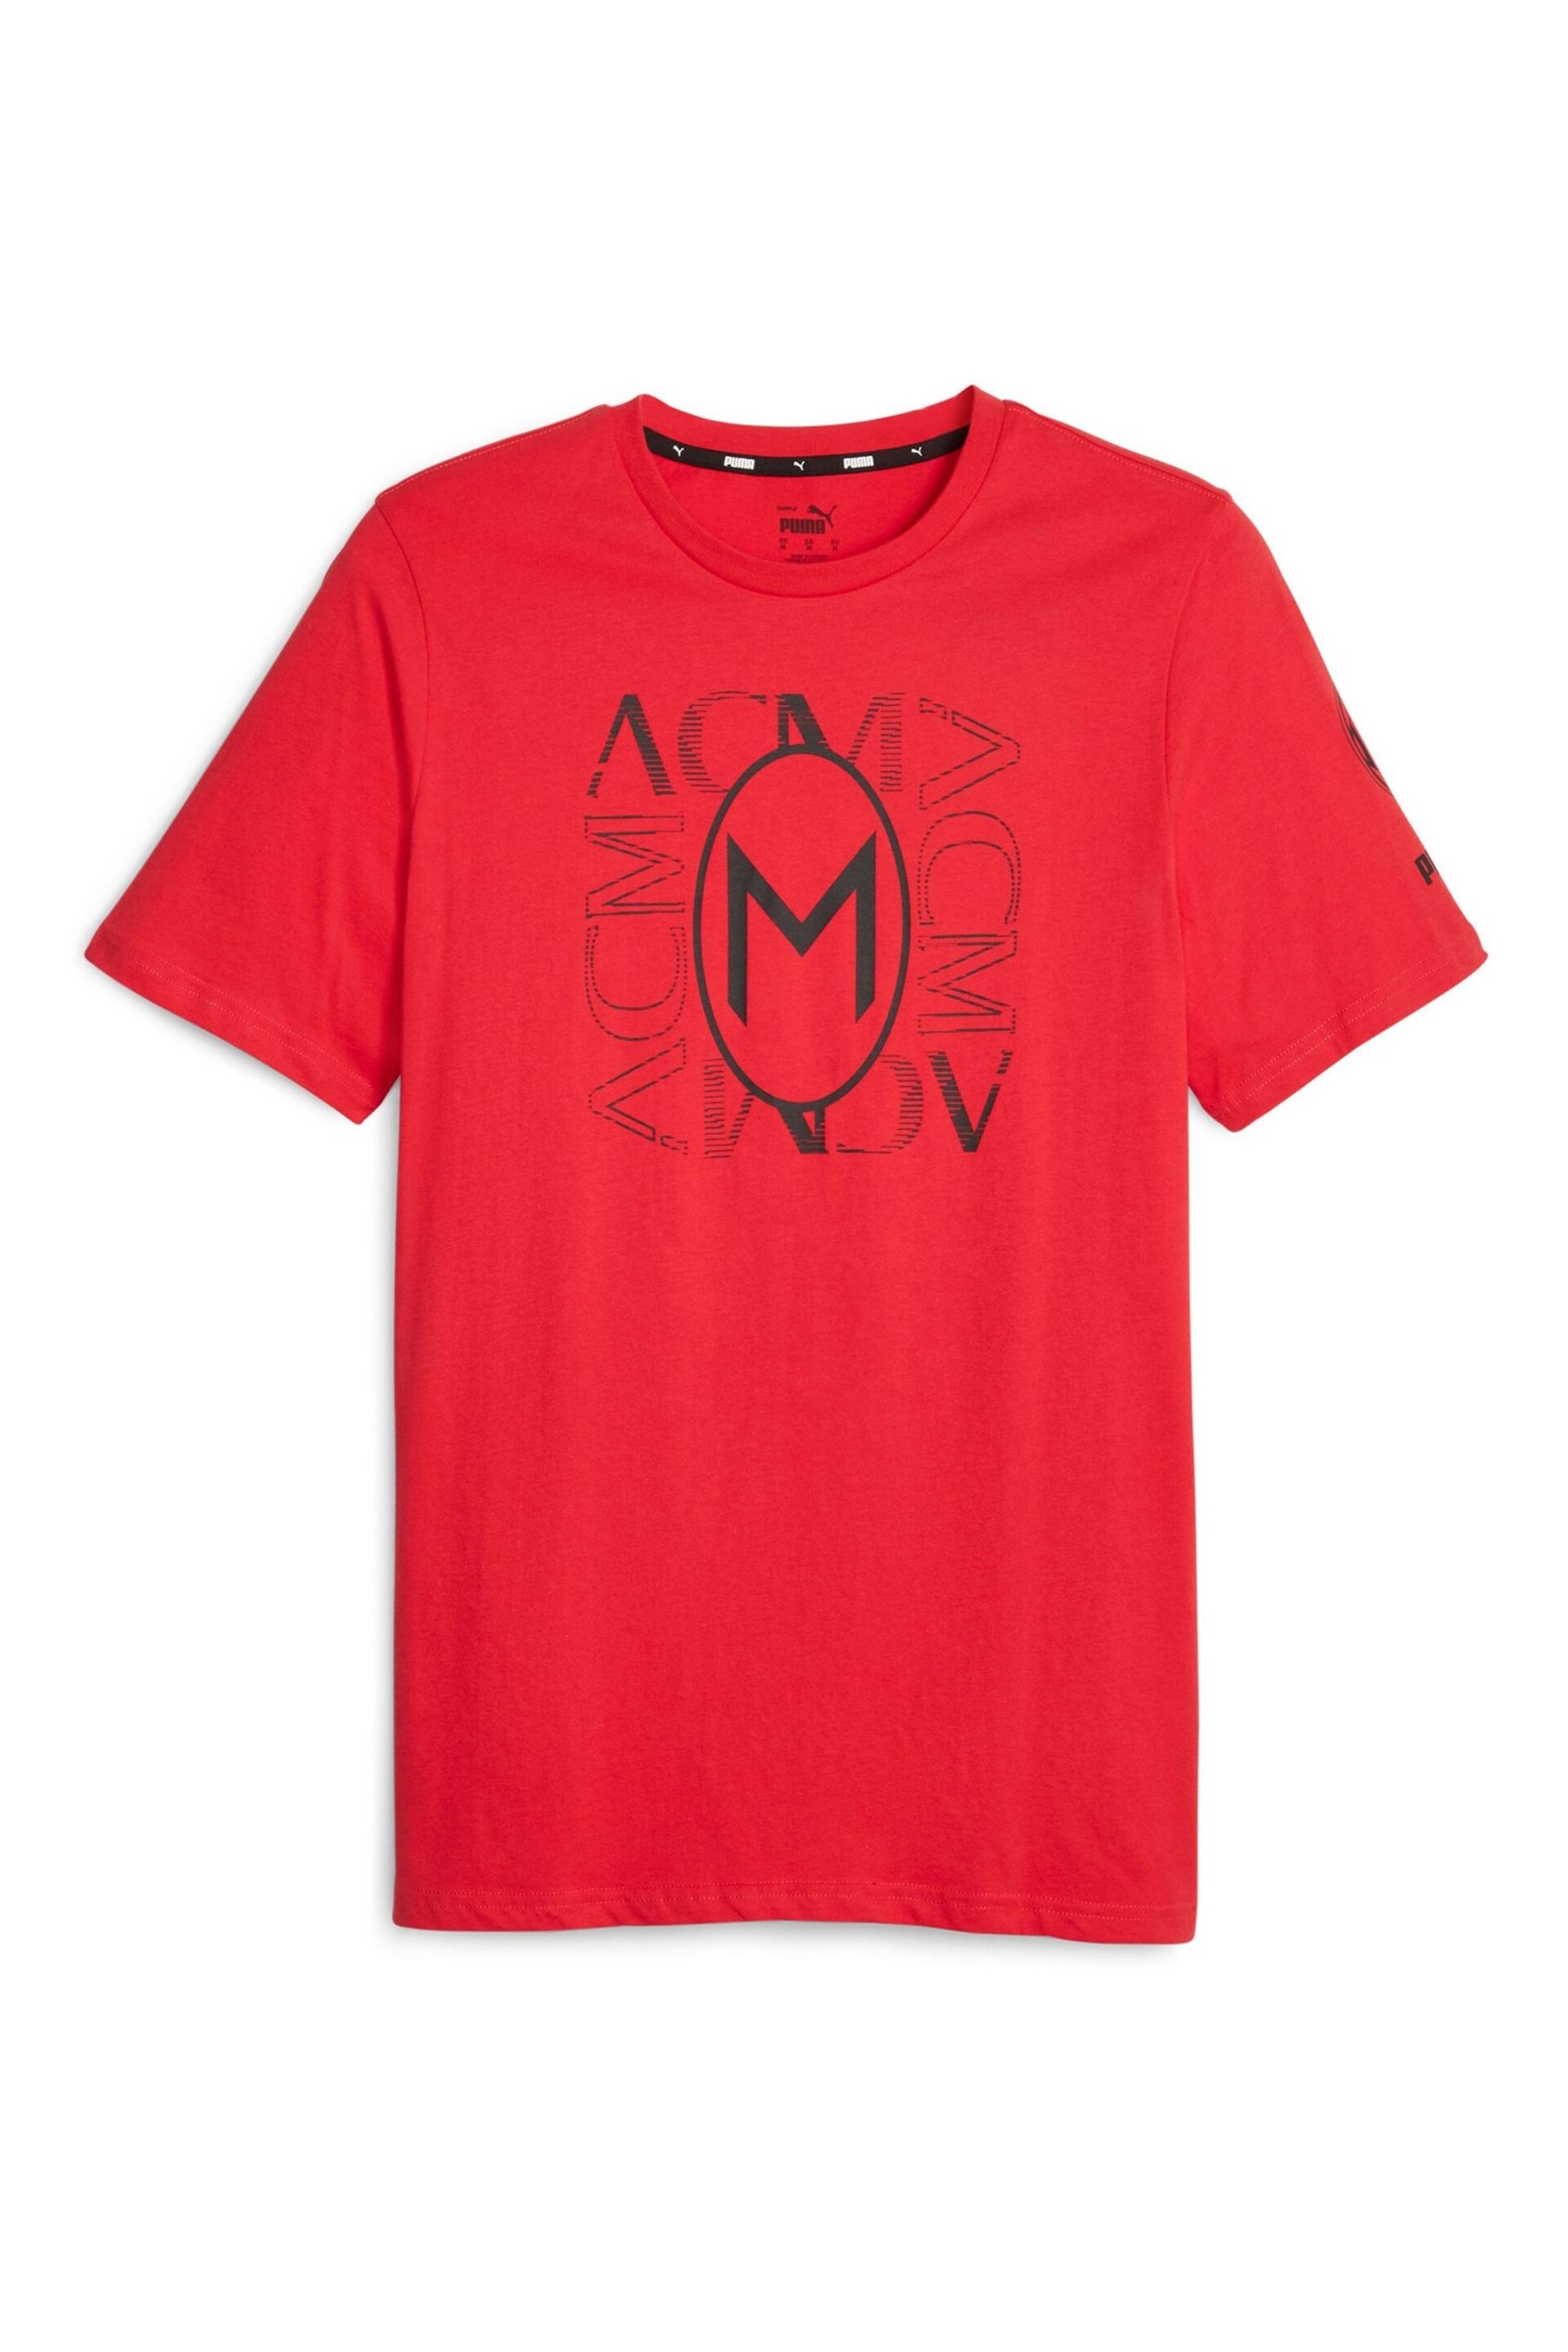 Puma Red AC Milan FtblCore Graphic T-Shirt - Image 2 of 3